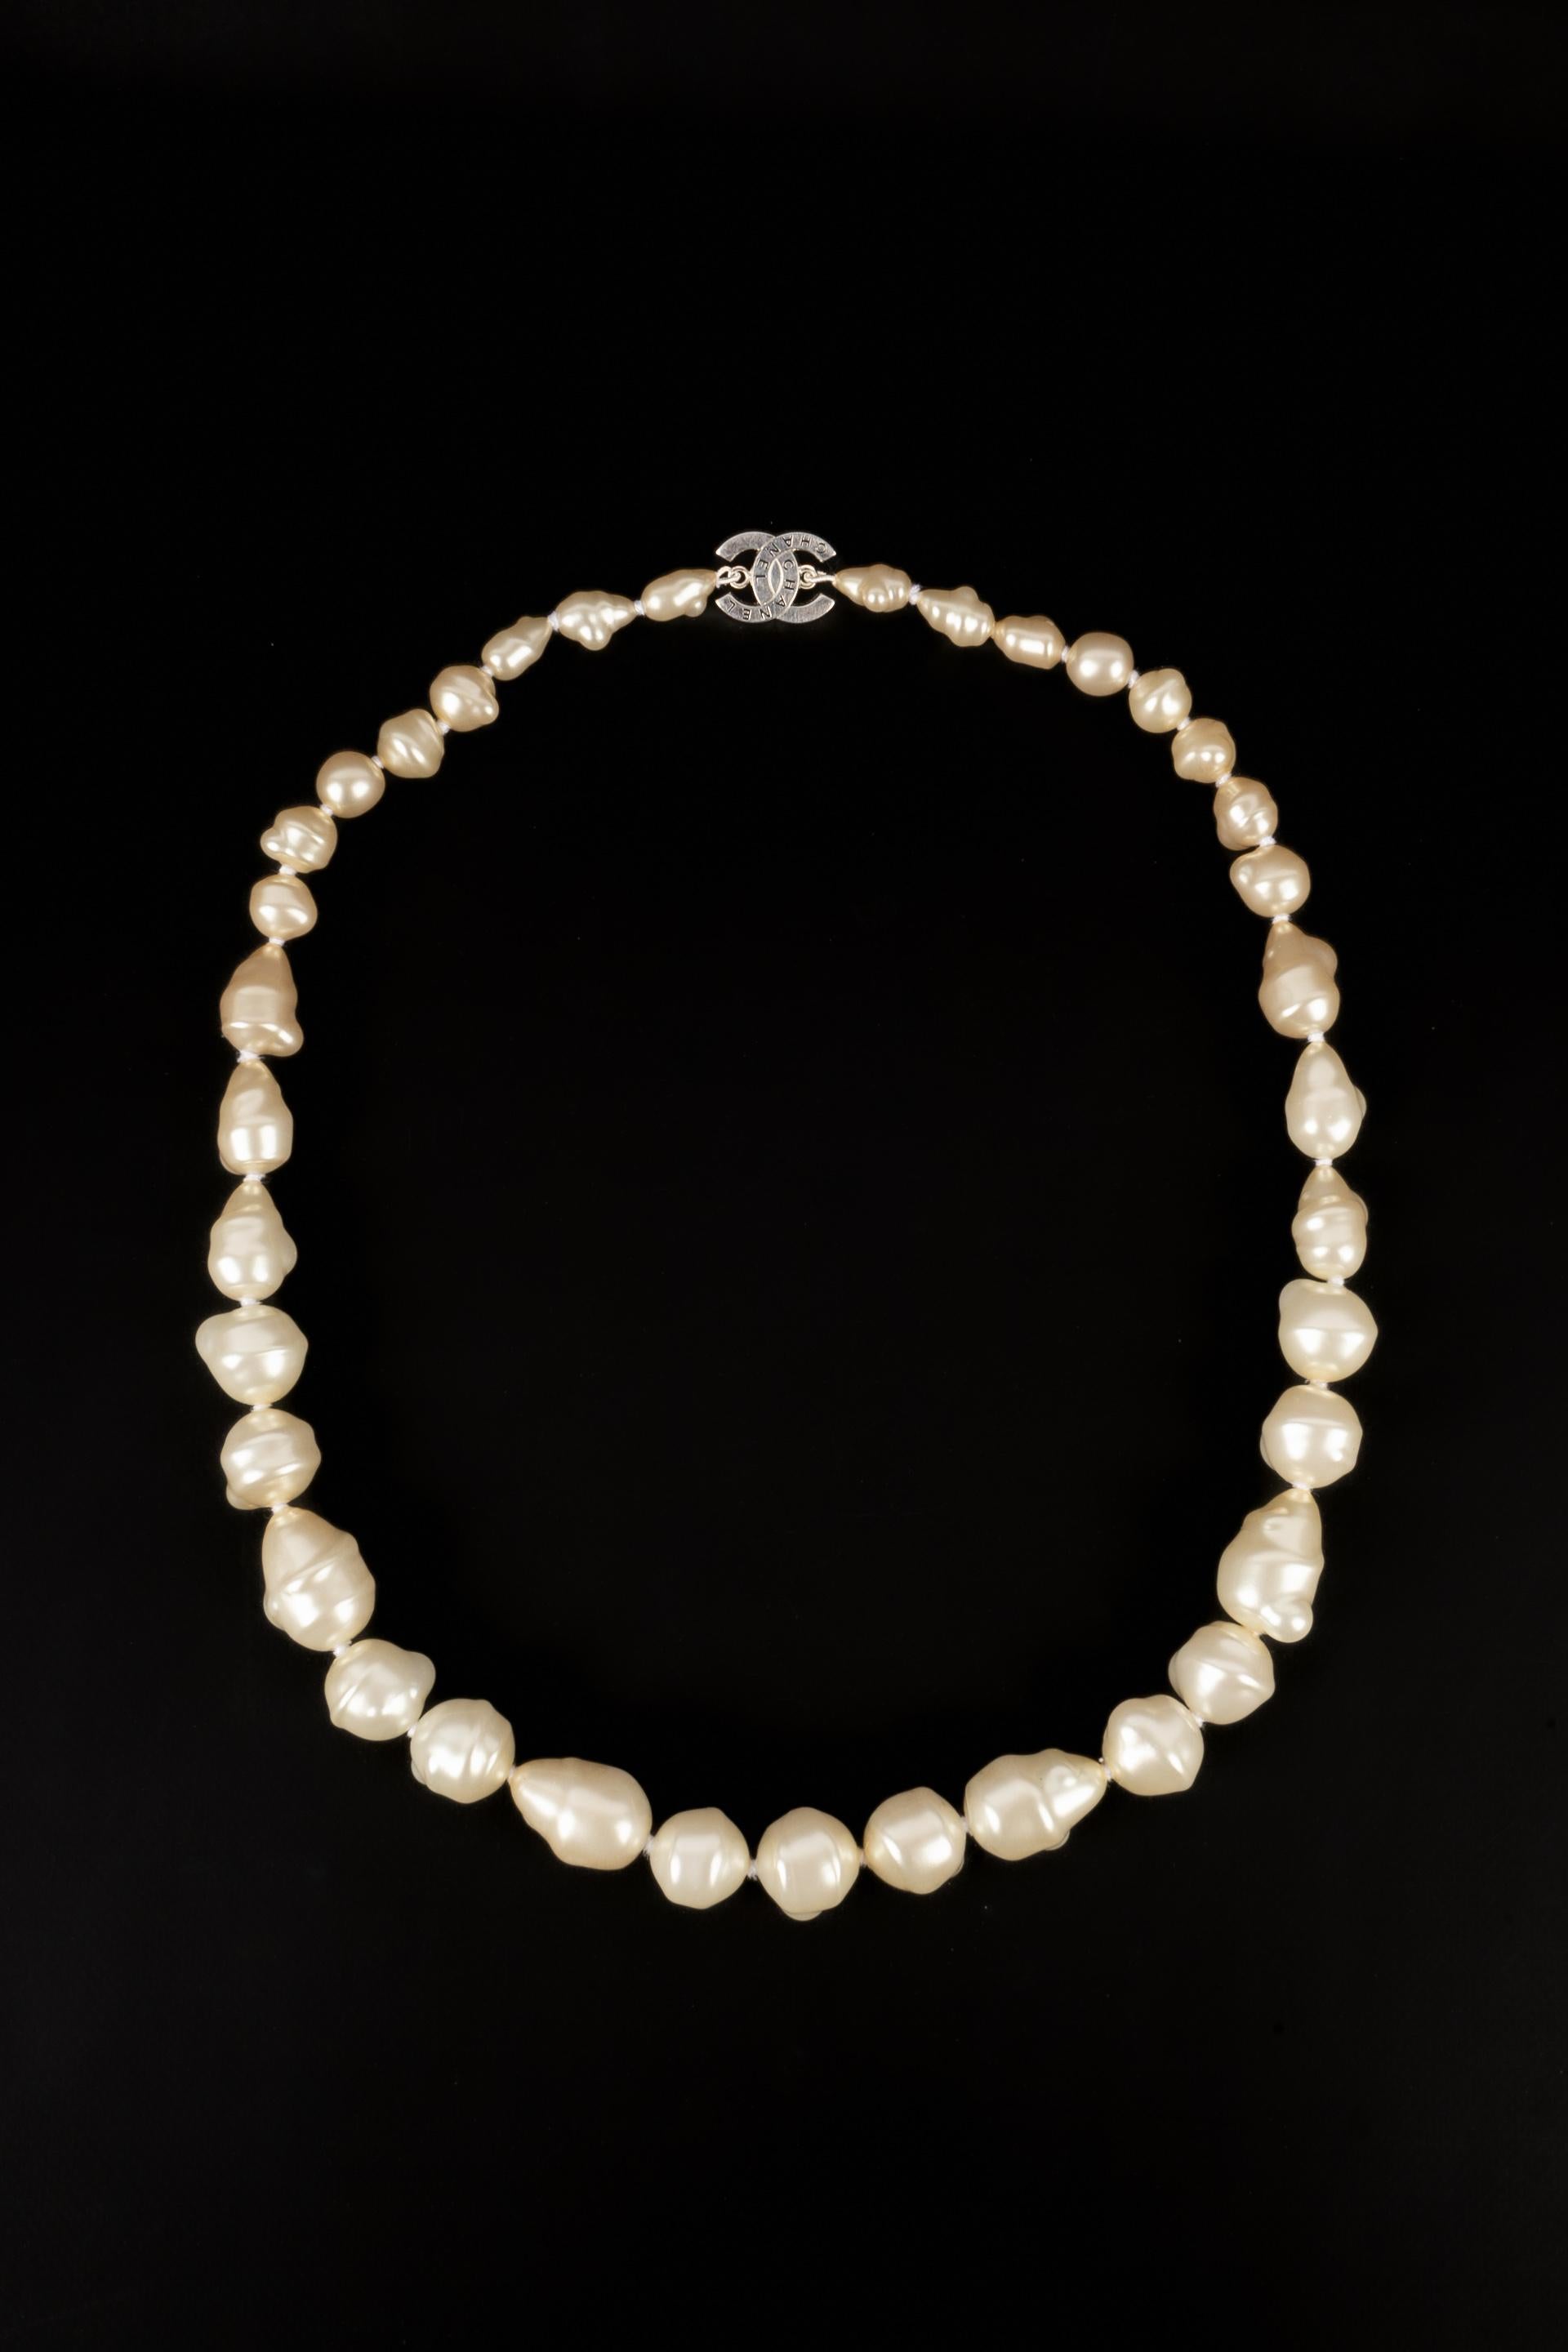 CHANEL - (Made in France) Silvery metal necklace with costume pearls. 1998 Spring-Summer Collection.

Condition:
Very good condition

Dimensions:
Length: 81 cm

CB92